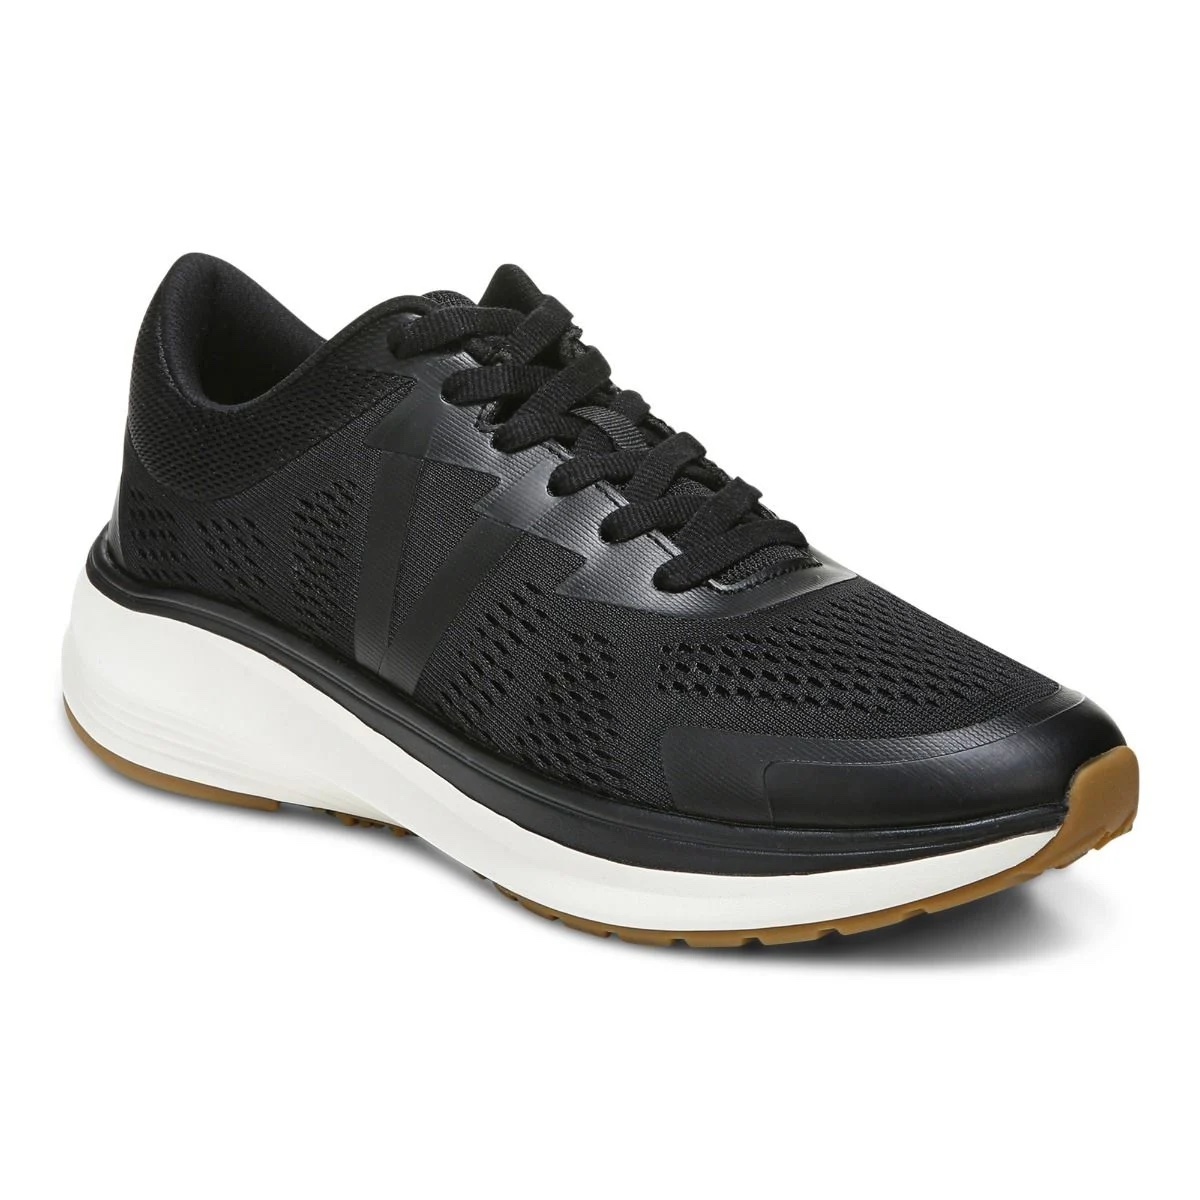 Vionic Limitless Sneaker, one of the best sneakers with arch support